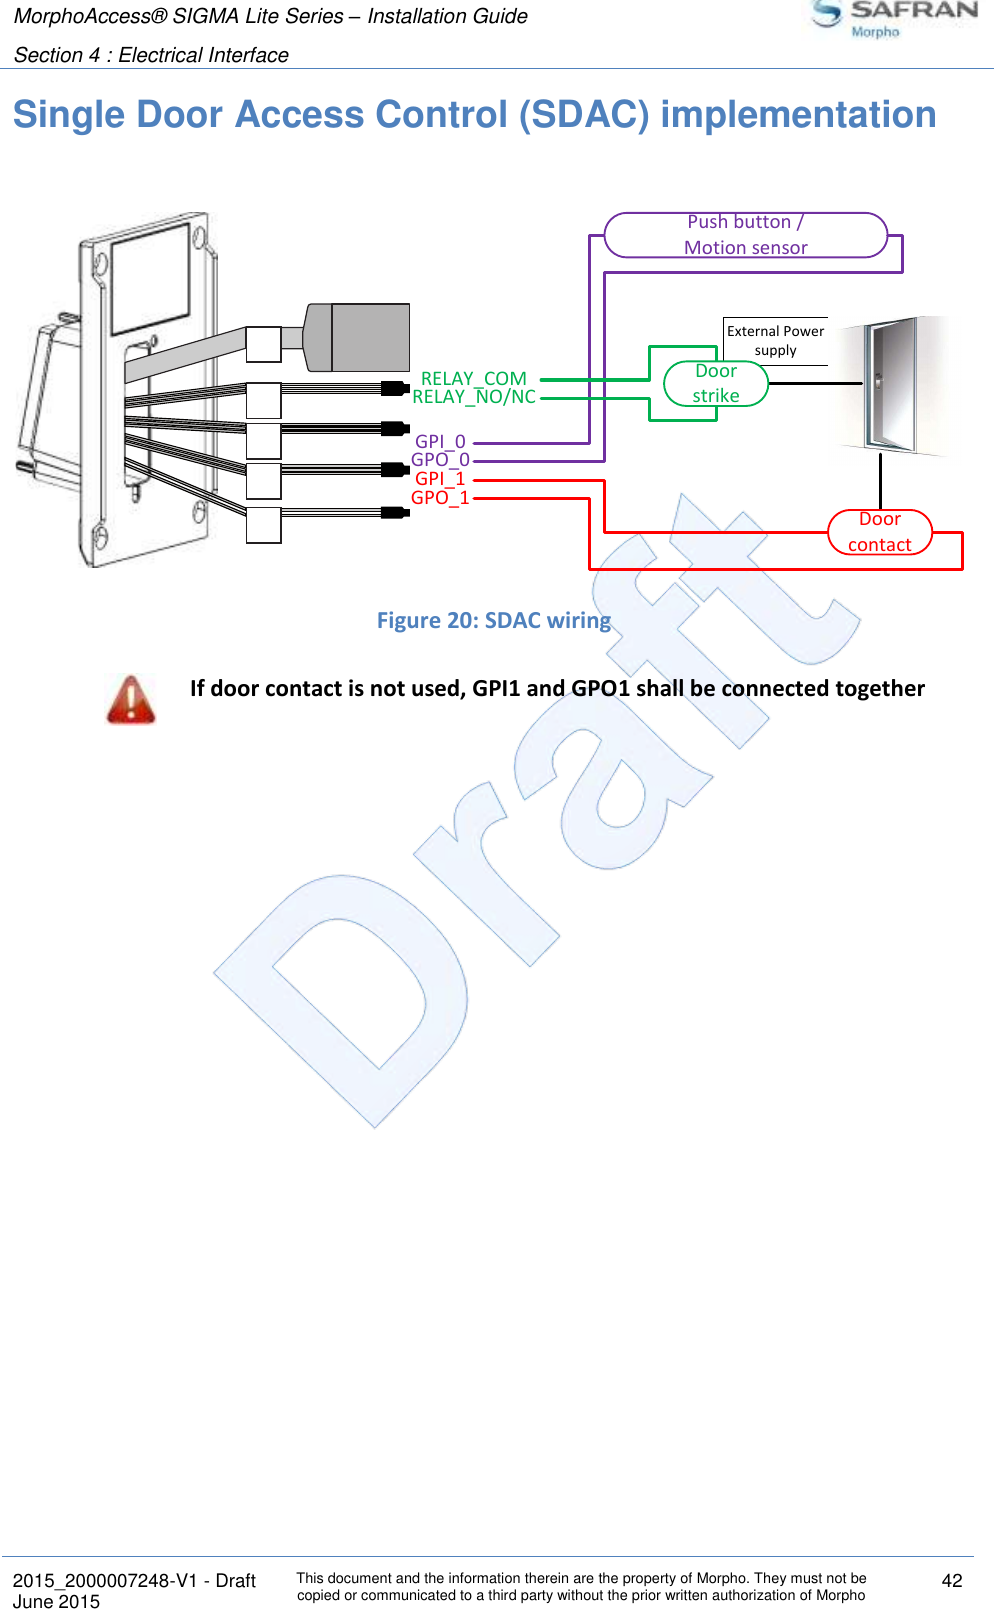 MorphoAccess® SIGMA Lite Series – Installation Guide  Section 4 : Electrical Interface   2015_2000007248-V1 - Draft This document and the information therein are the property of Morpho. They must not be copied or communicated to a third party without the prior written authorization of Morpho 42 June 2015   Single Door Access Control (SDAC) implementation   Figure 20: SDAC wiring  If door contact is not used, GPI1 and GPO1 shall be connected together External Power supplyGPI_1GPO_0Push button /Motion sensorGPI_0GPO_1RELAY_COMRELAY_NO/NCDoor contactDoor strike